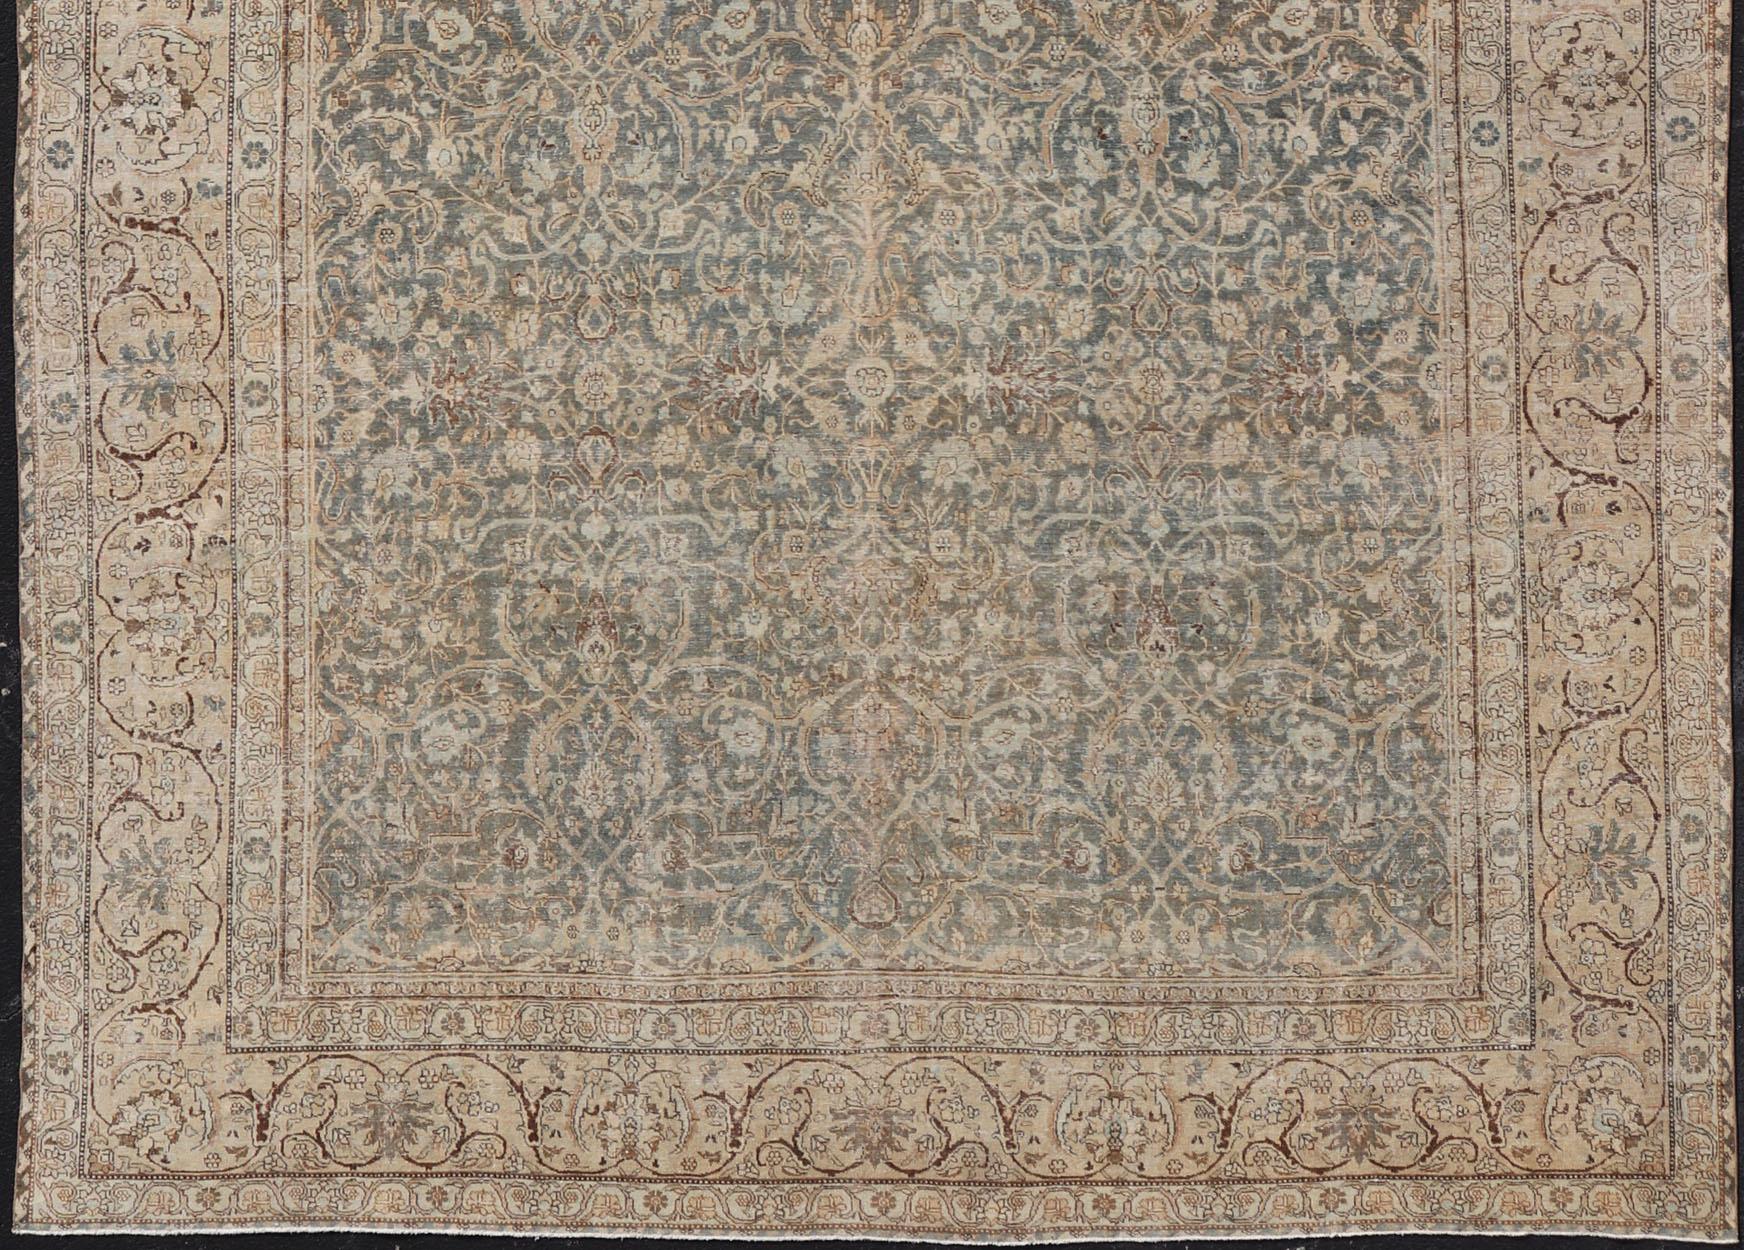 Muted Blue-Gray Background Persian Tabriz rug with Floral and geometric motifs, Keivan Woven Arts/ rug VAS-2, country of origin / type: Iran / Tabriz, circa 1910. Large Antique Persian Tabriz Rug in Wool with All-Over Floral Design.

Measures: